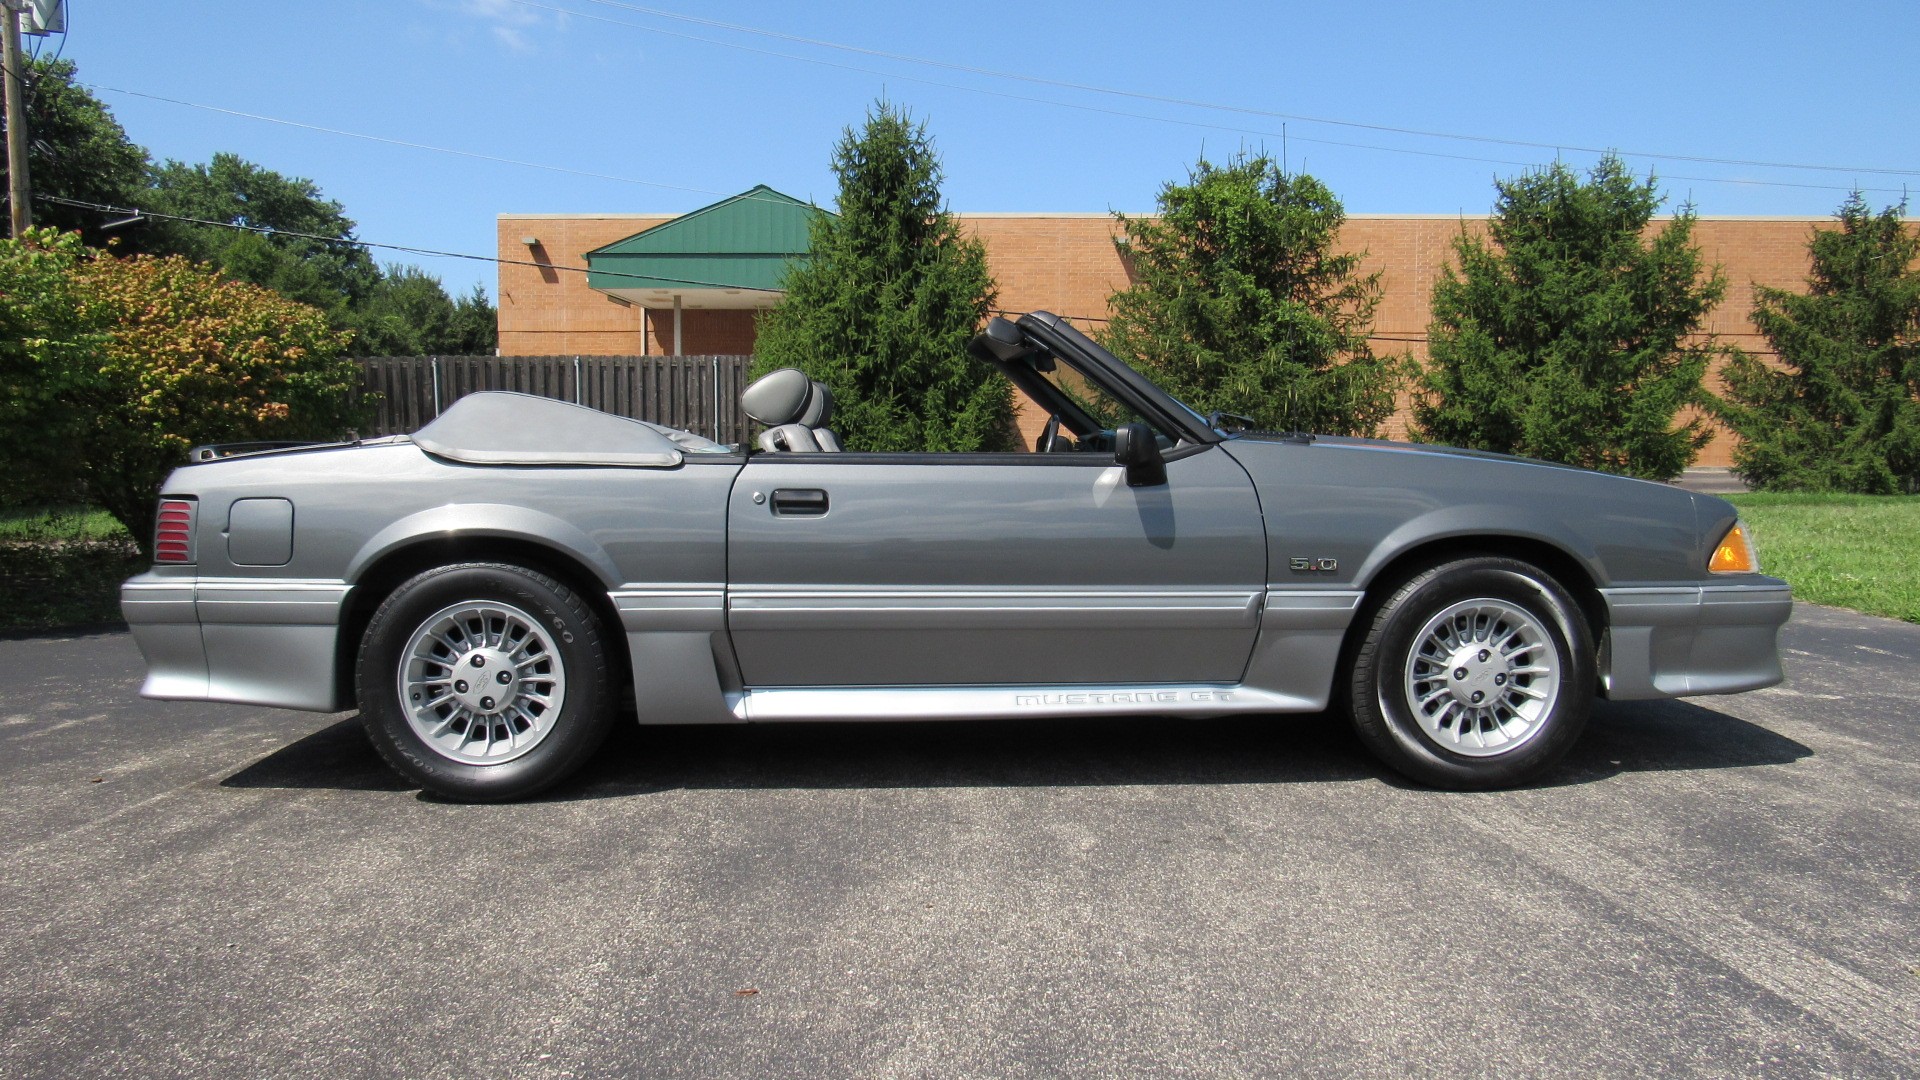 1988 Mustang GT, One Owner, 29K Miles, 5 Speed, SOLD!